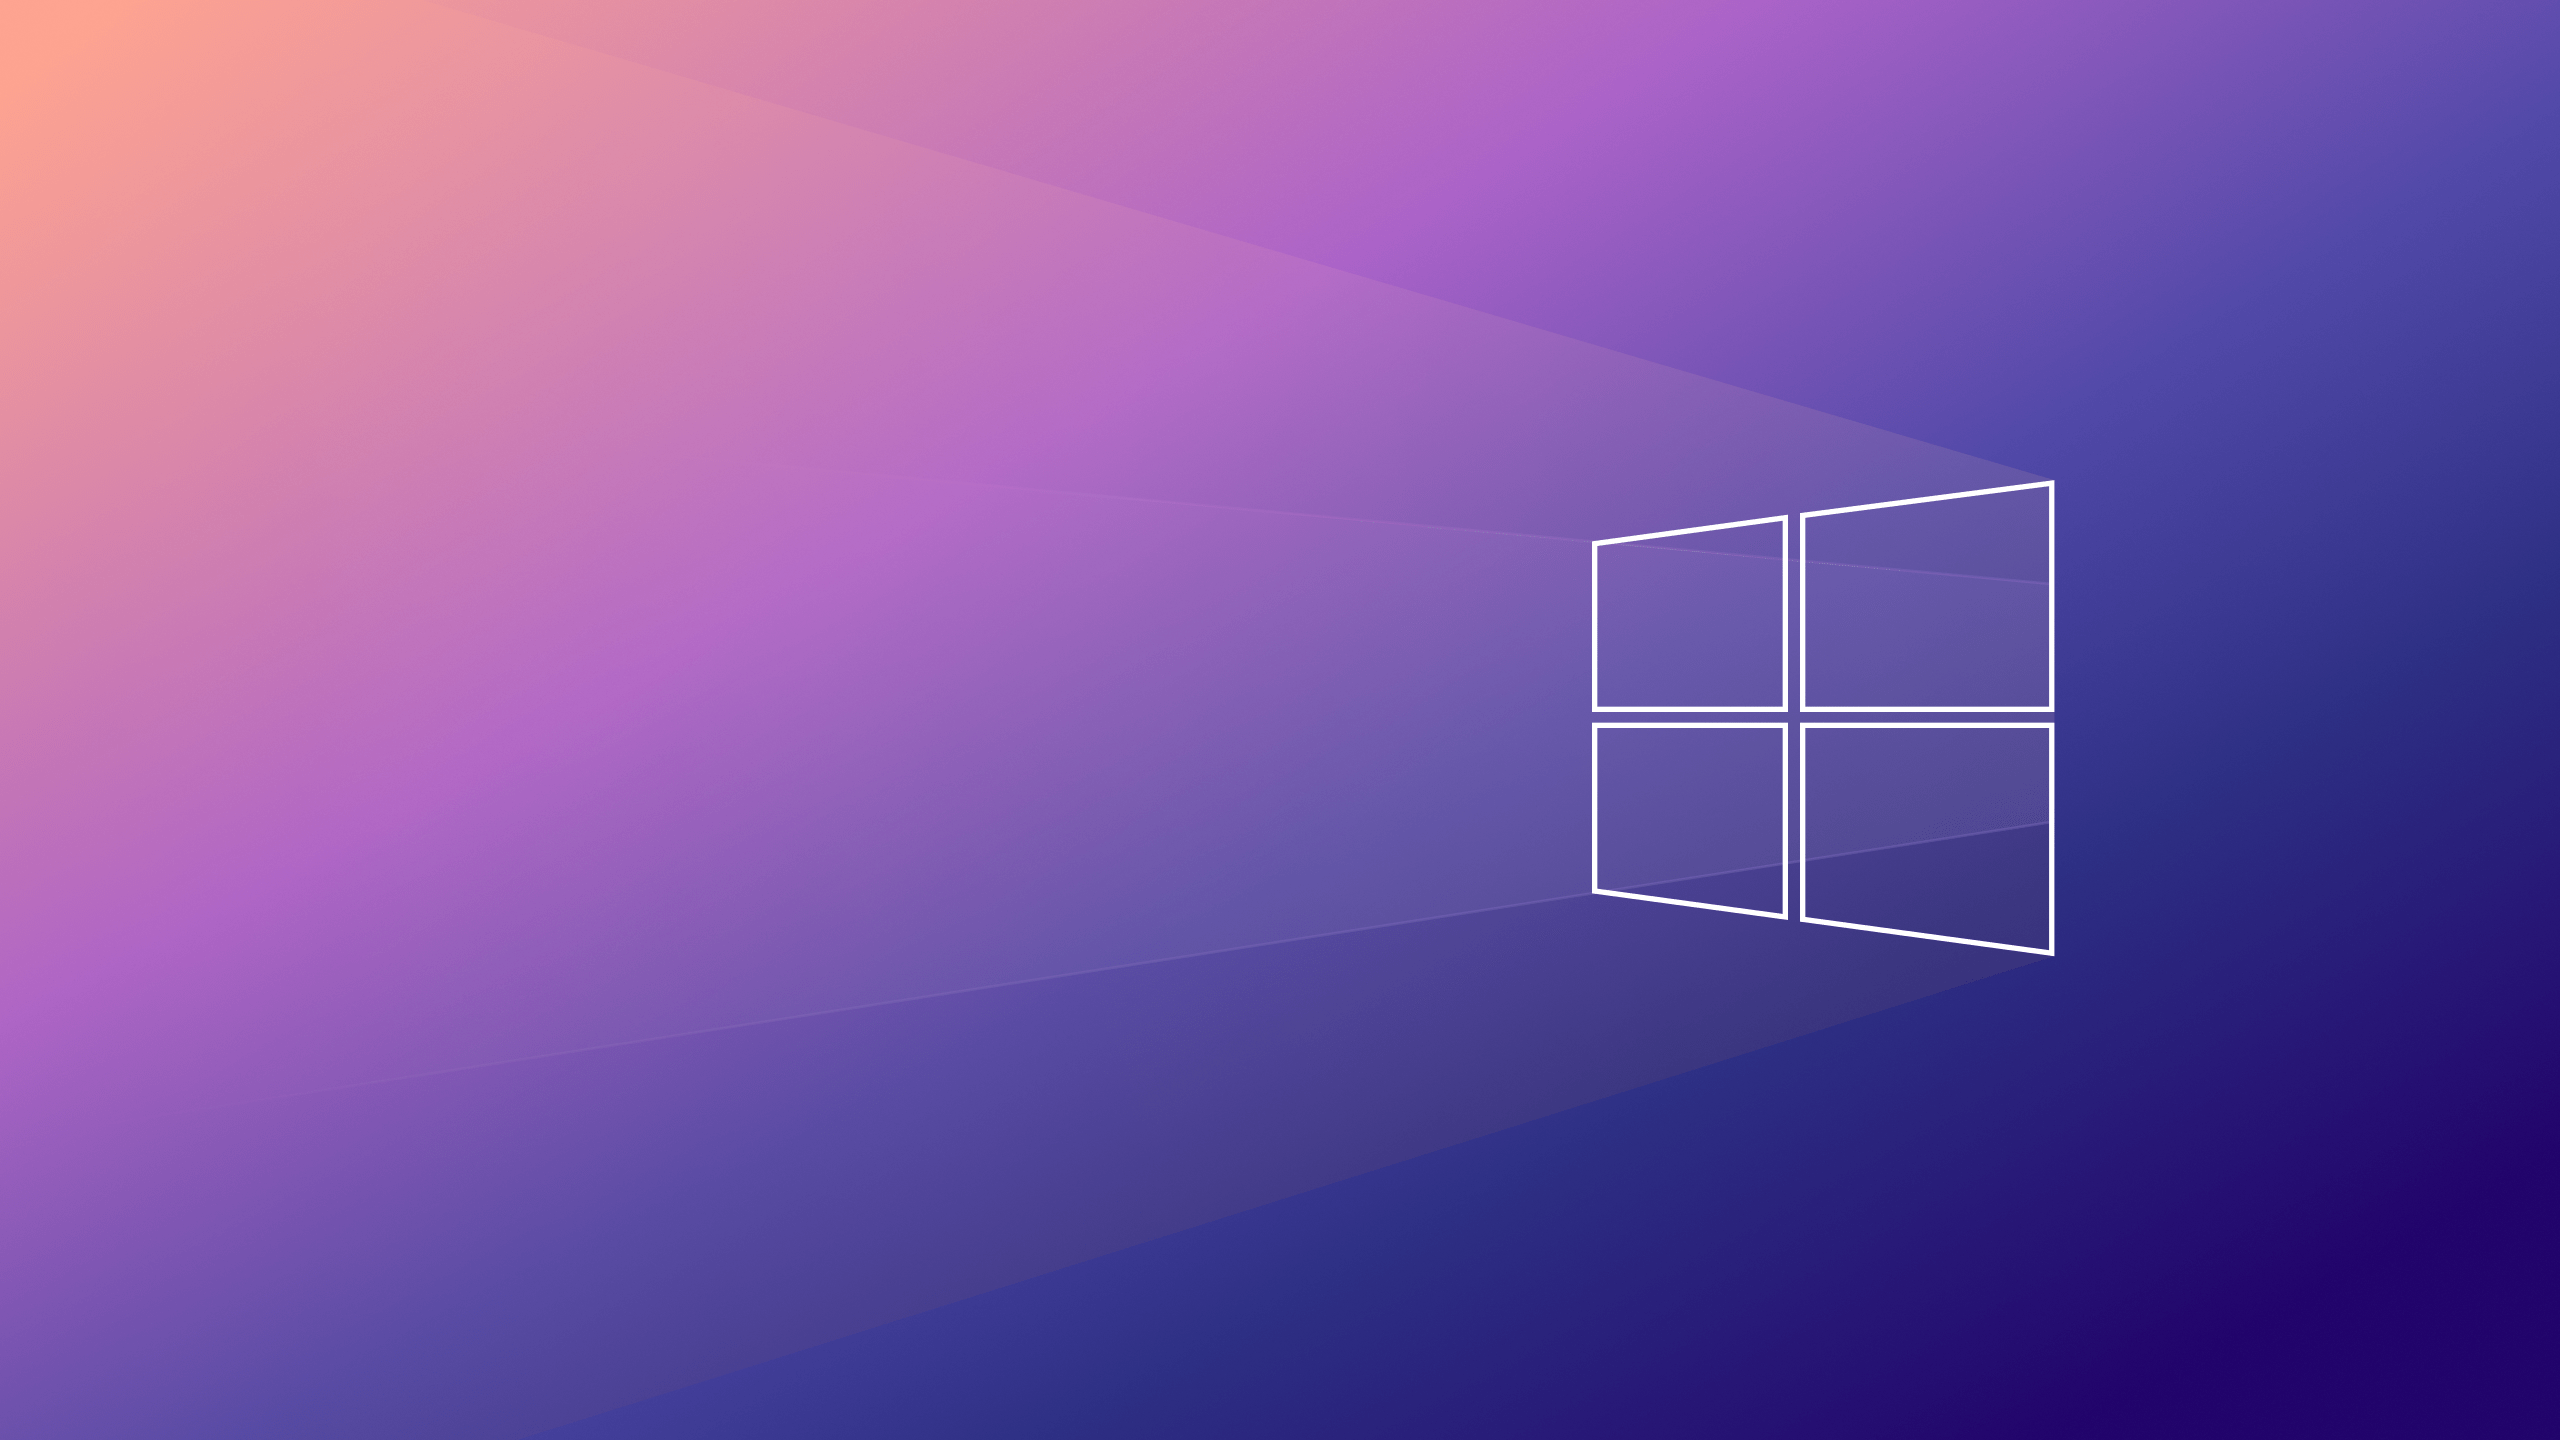 A windows 10 desktop wallpaper with purple and blue colors - HD